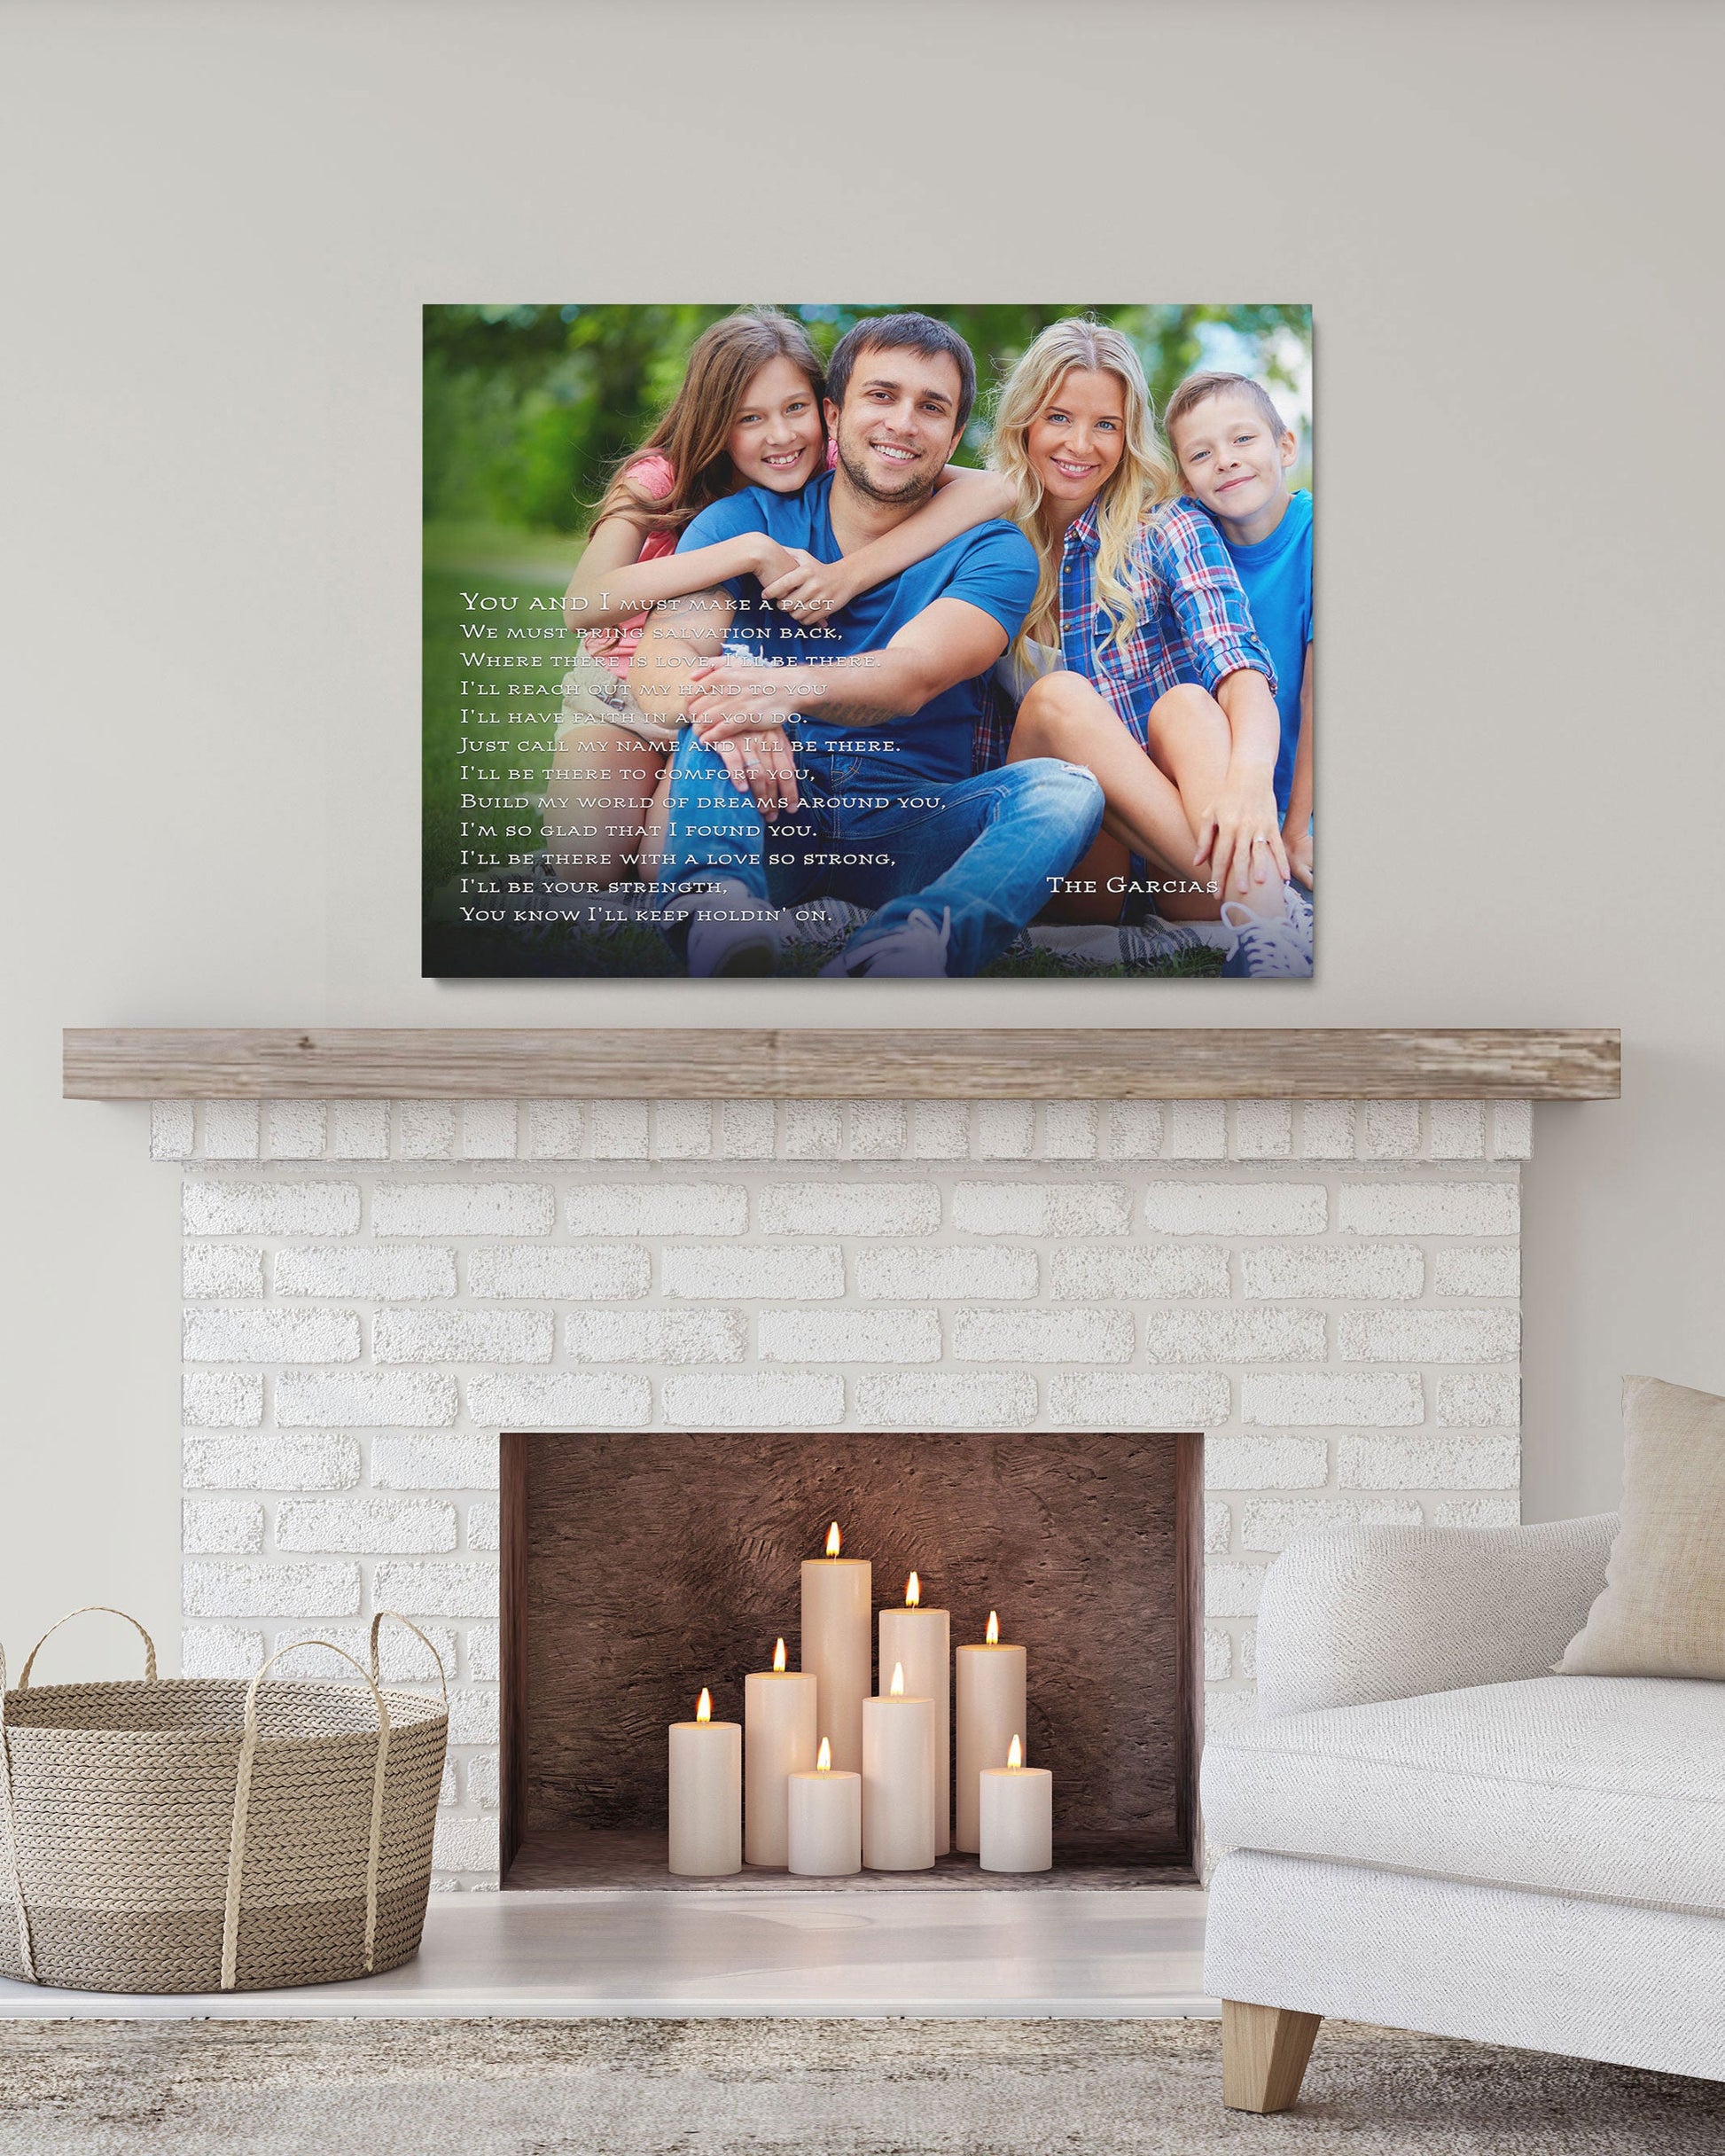 Personalized Family Wall Art from photo - Transit Design